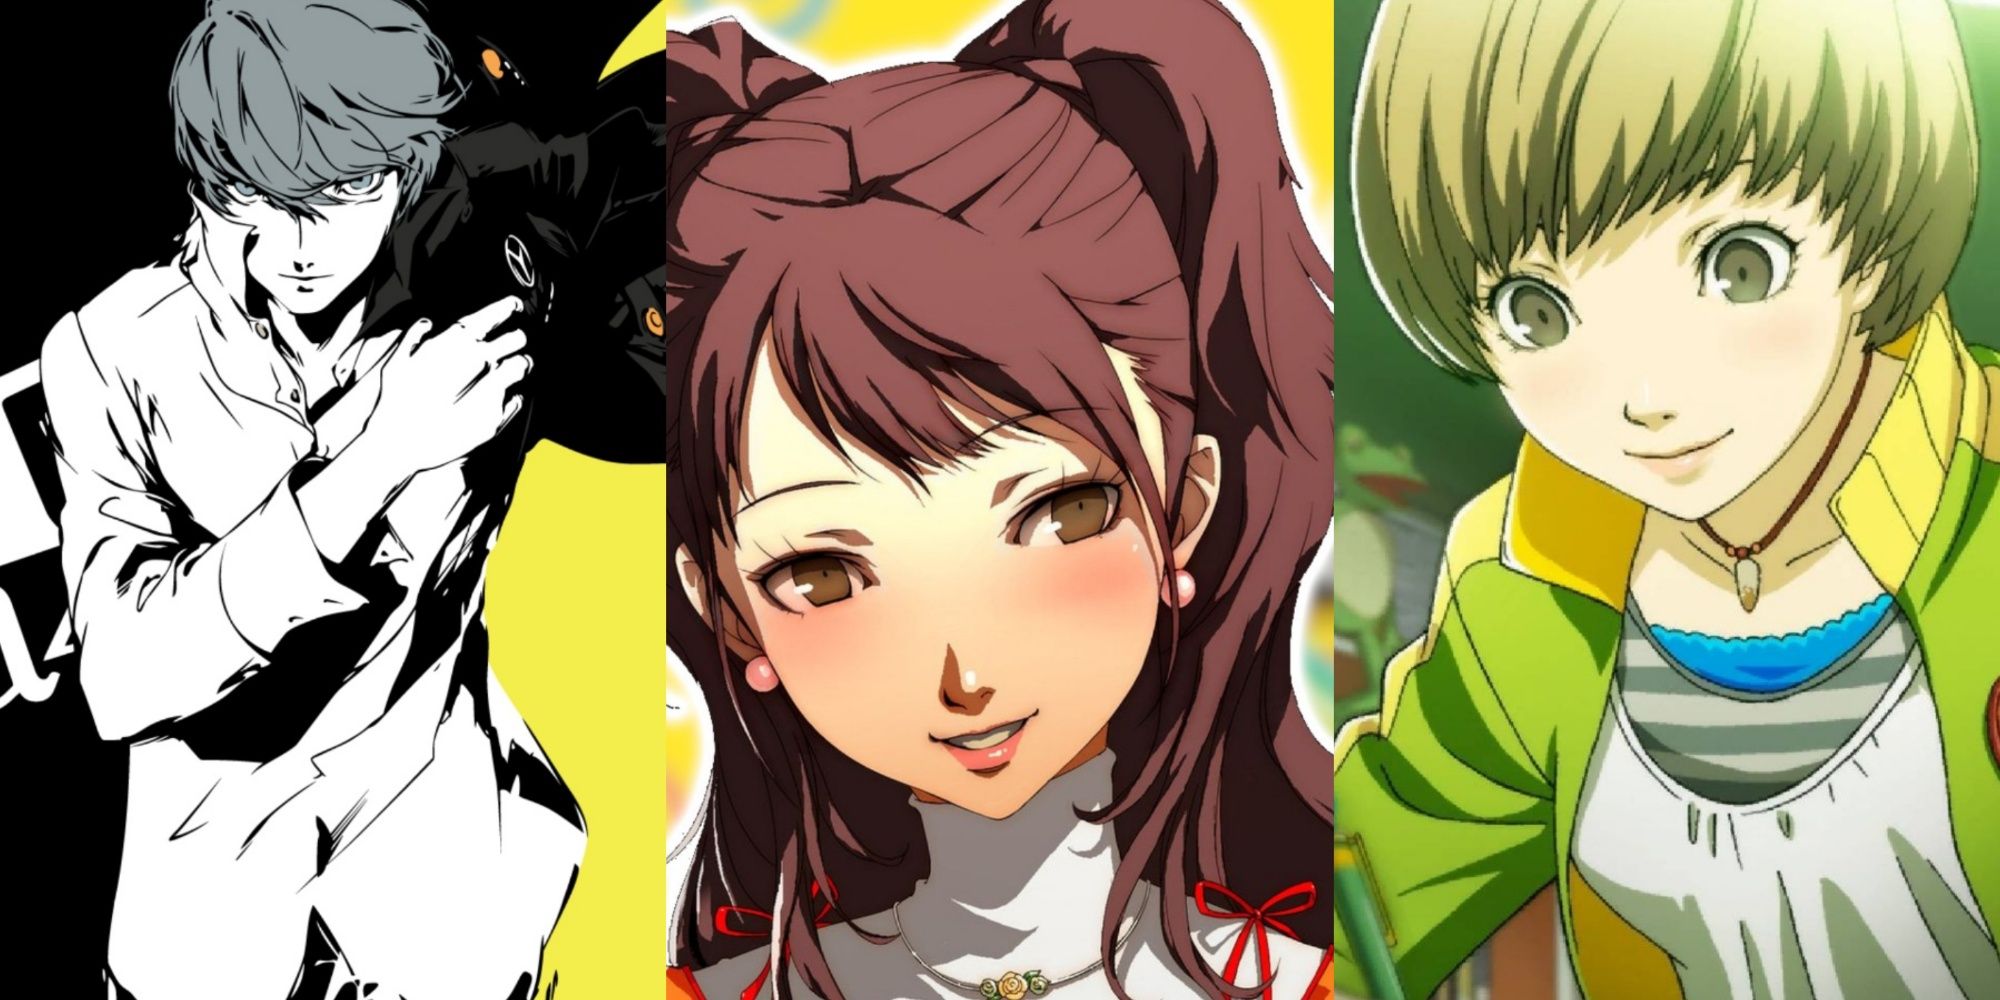 A trisplit of Yu, Rise and Chie from Persona 4